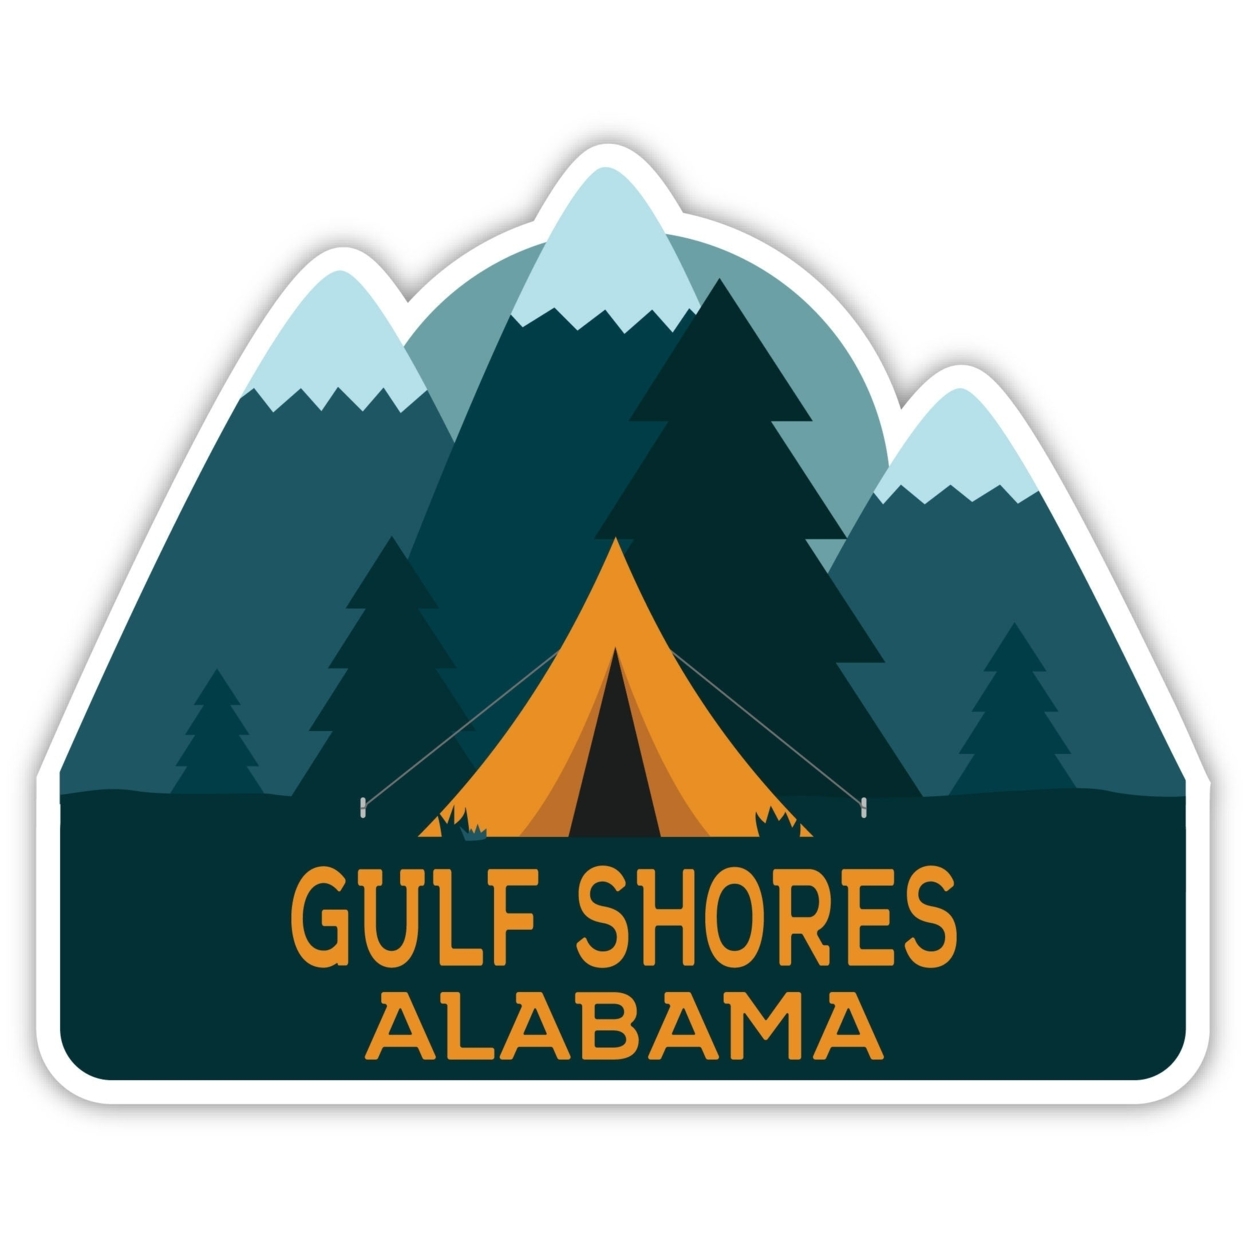 Gulf Shores Alabama Souvenir Decorative Stickers (Choose Theme And Size) - 4-Pack, 4-Inch, Tent